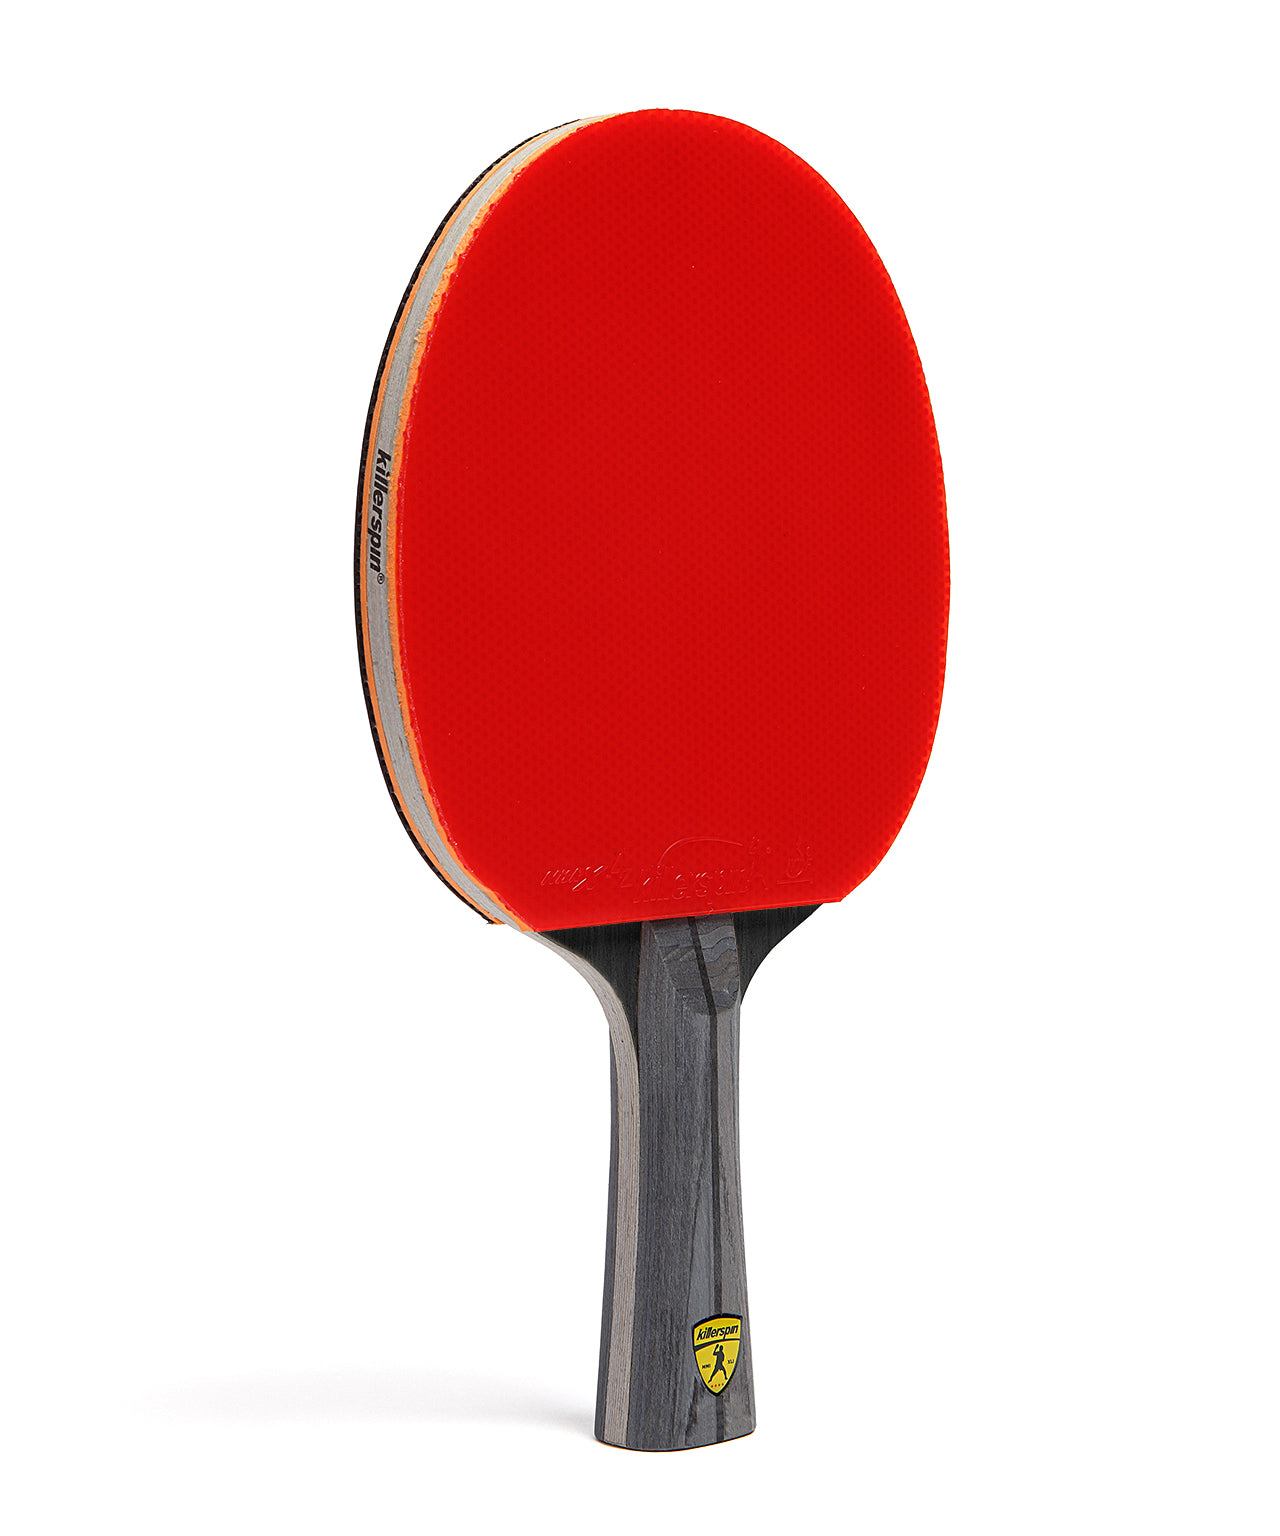 Killerspin Ping Pong Racket Jet600 Spin N2 - Red Rubber